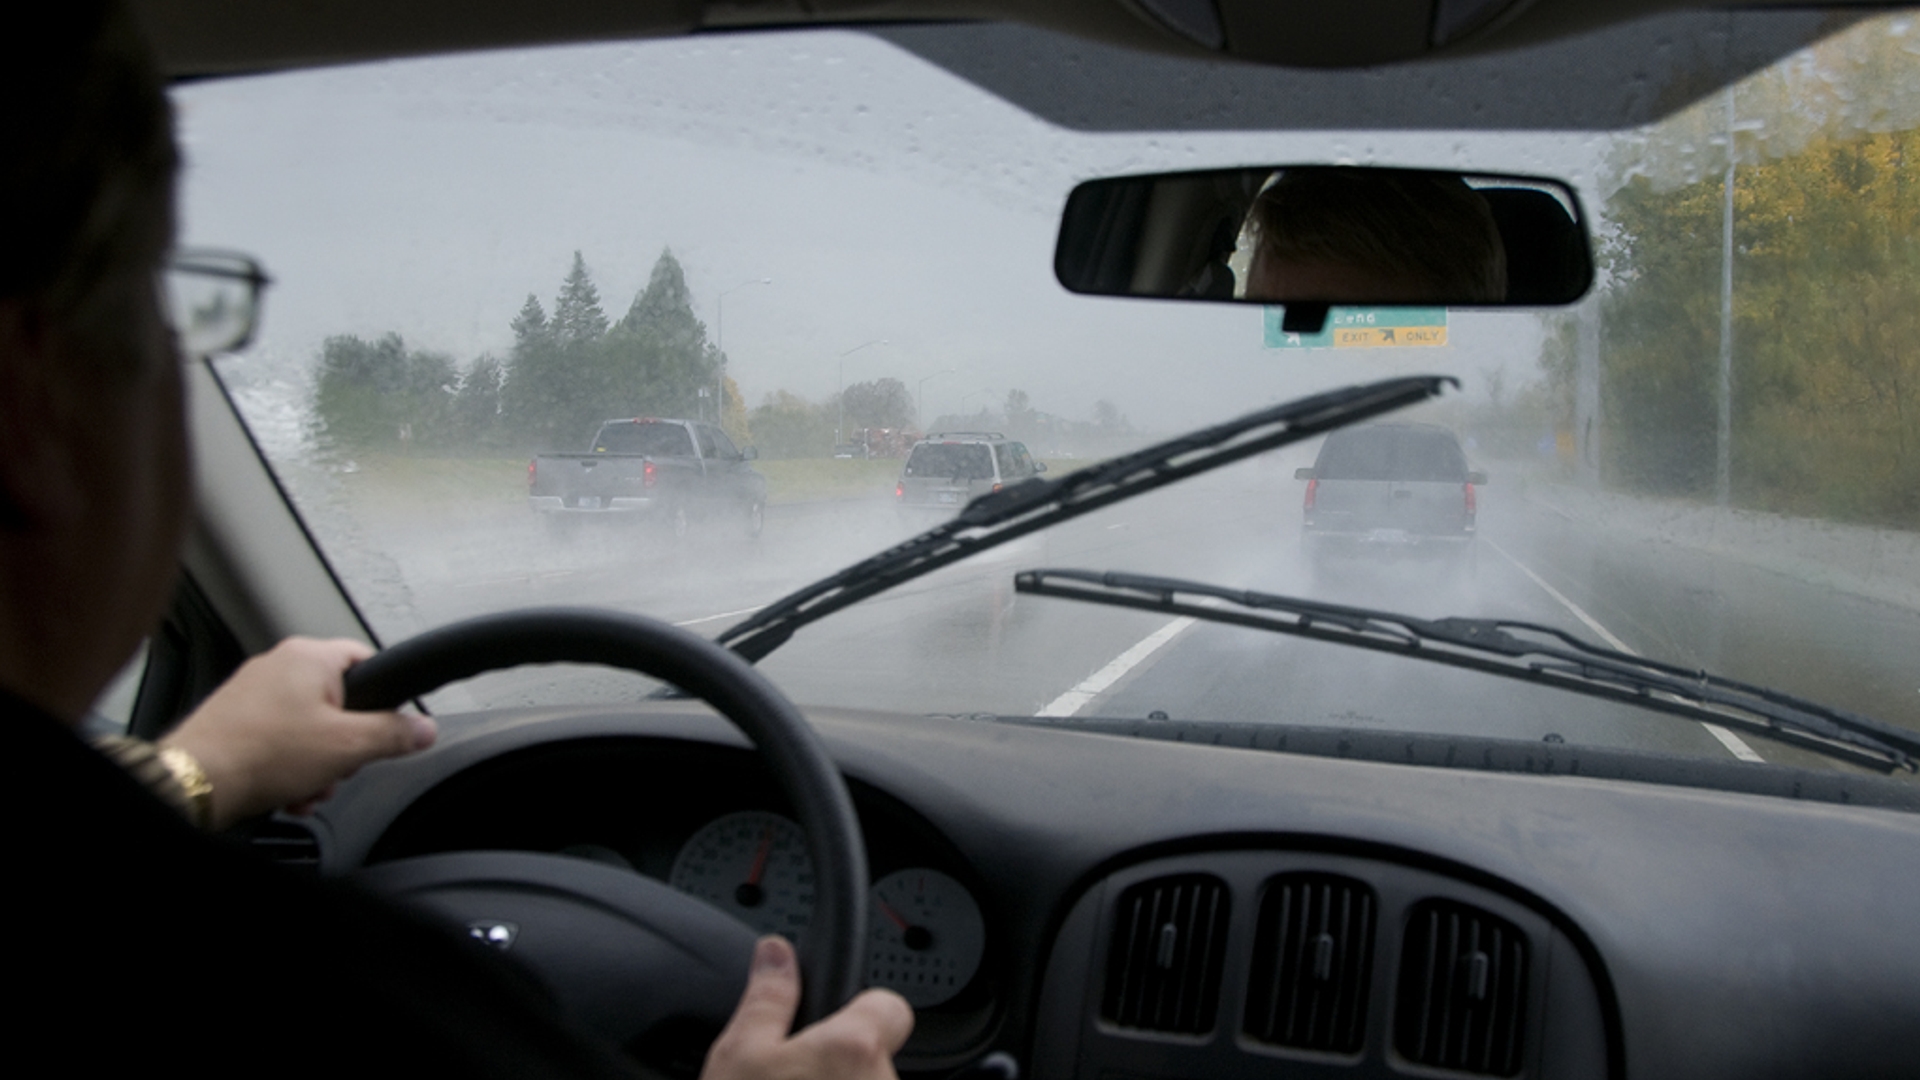 Driving_in_the_rain_(5124407306)